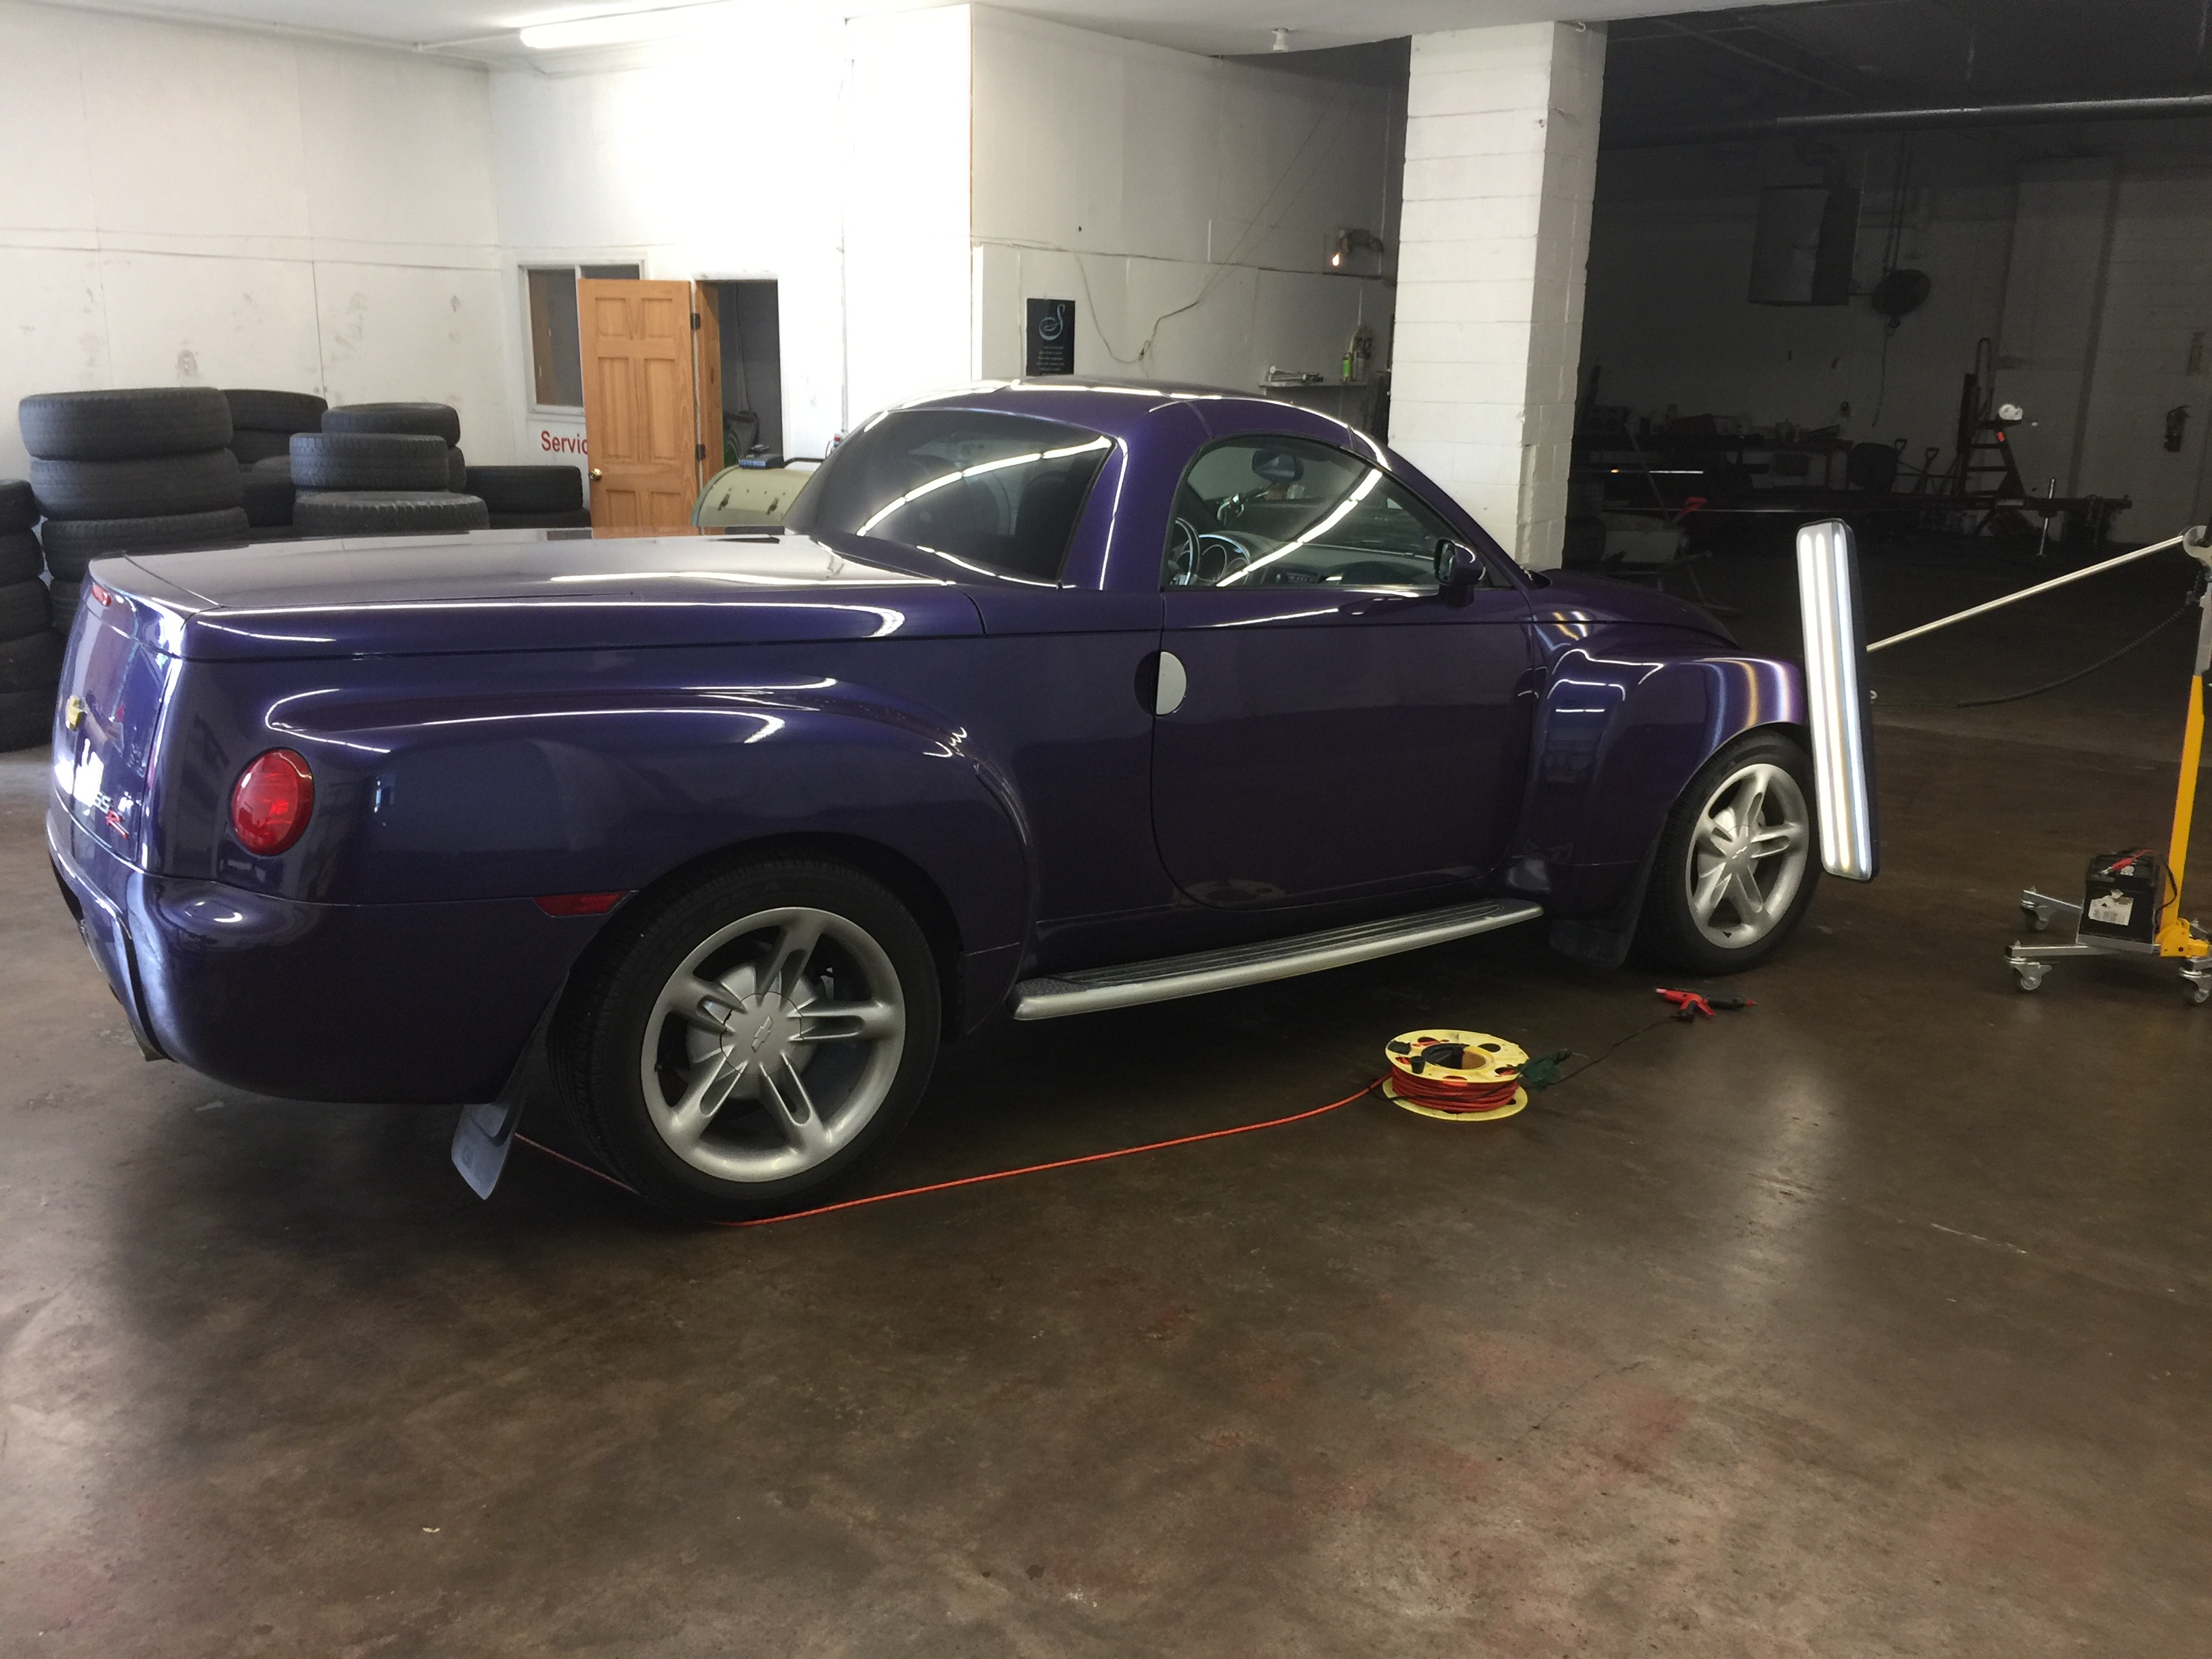 2004 Chevy SSR, Paintless Dent Removal on the passenger fender, removed by Michael Bocek out of Springfield, IL http://217dent.com